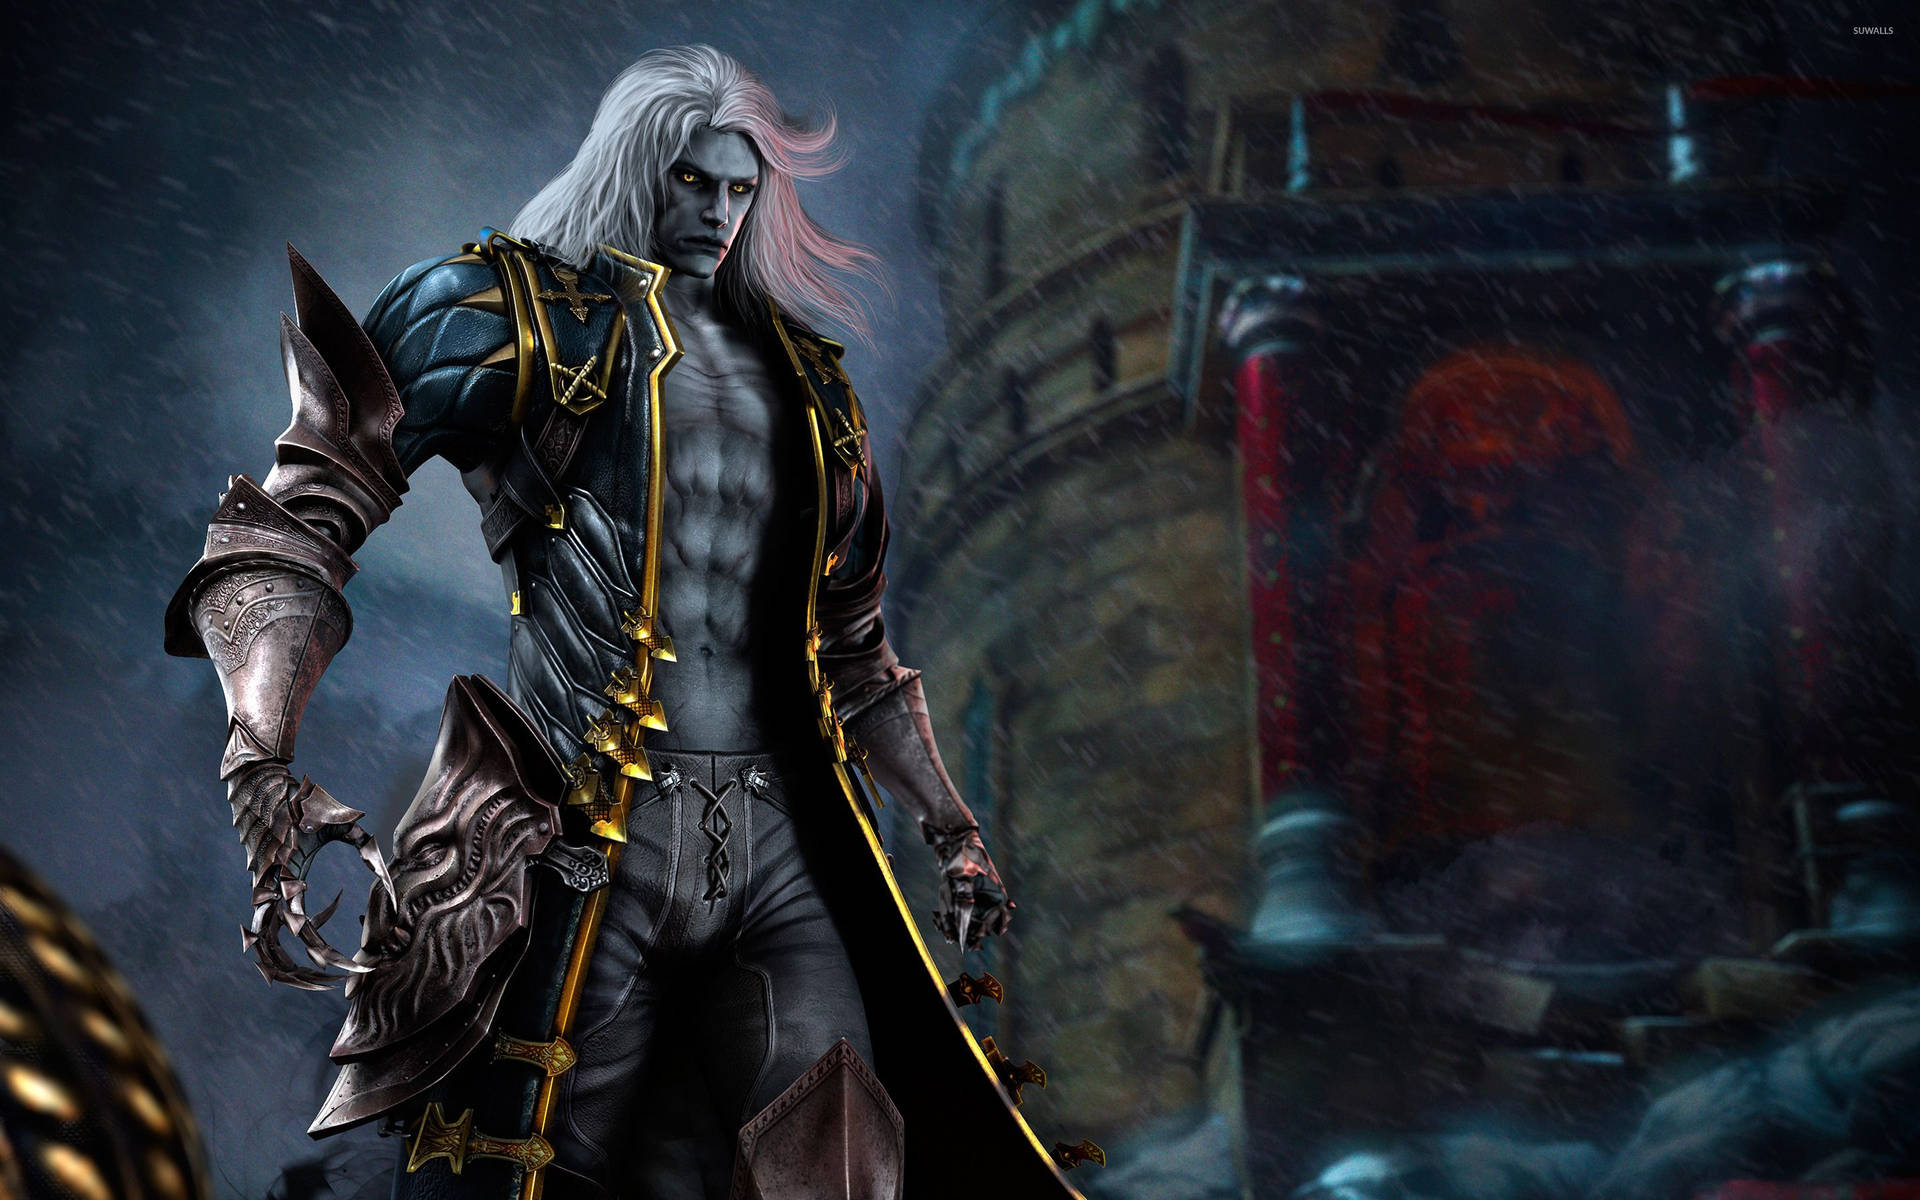 “Alucard fights against his own darkness at the gates of Castlevania” Wallpaper